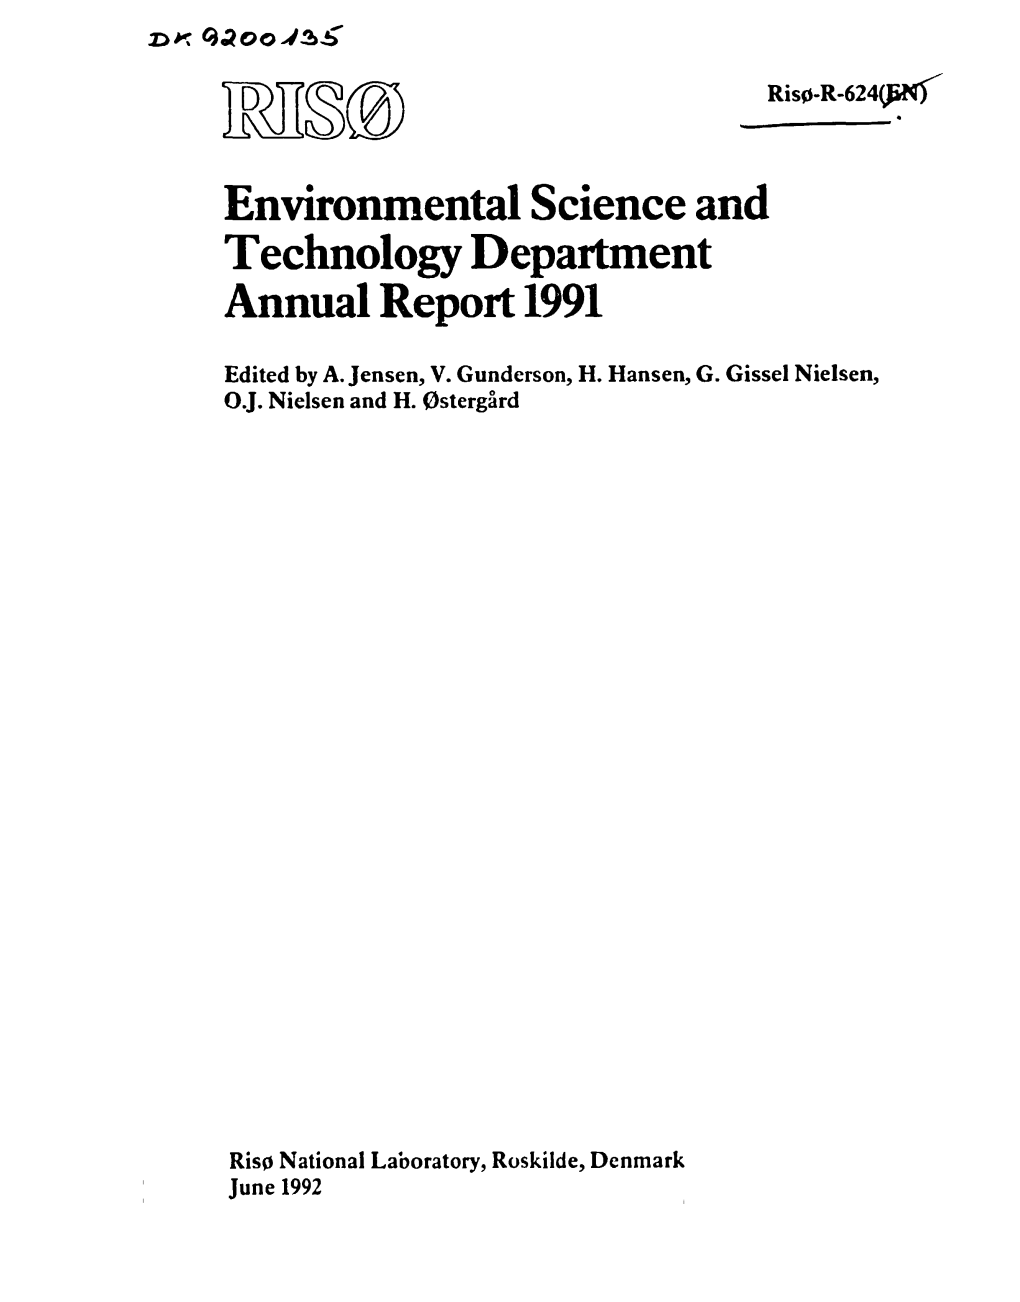 Environmental Science and Technology Department Annual Report 1991